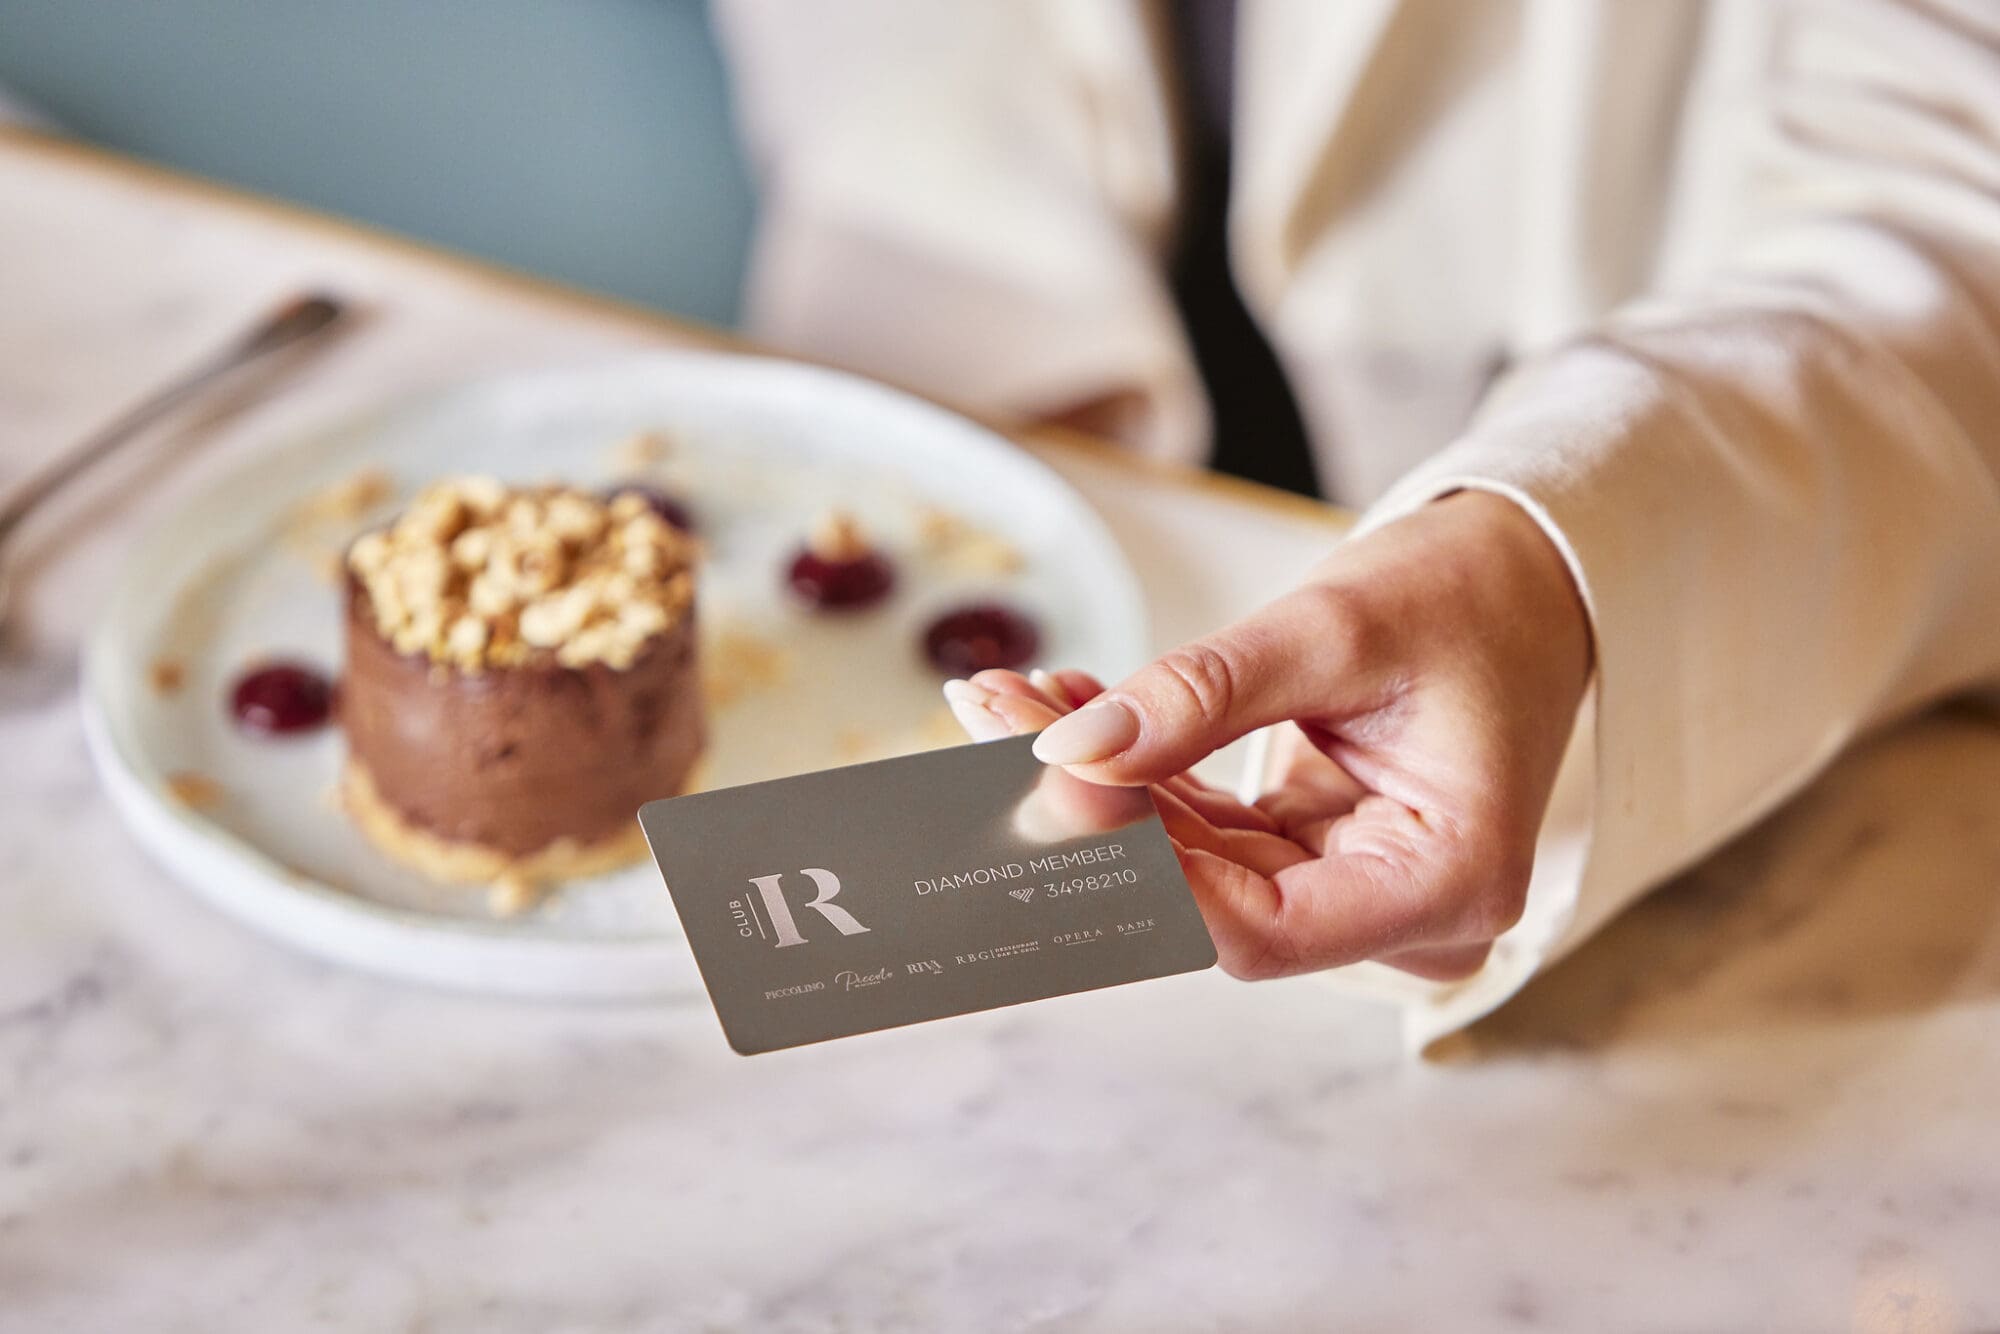 A person is holding a Club IR Diamond Member card